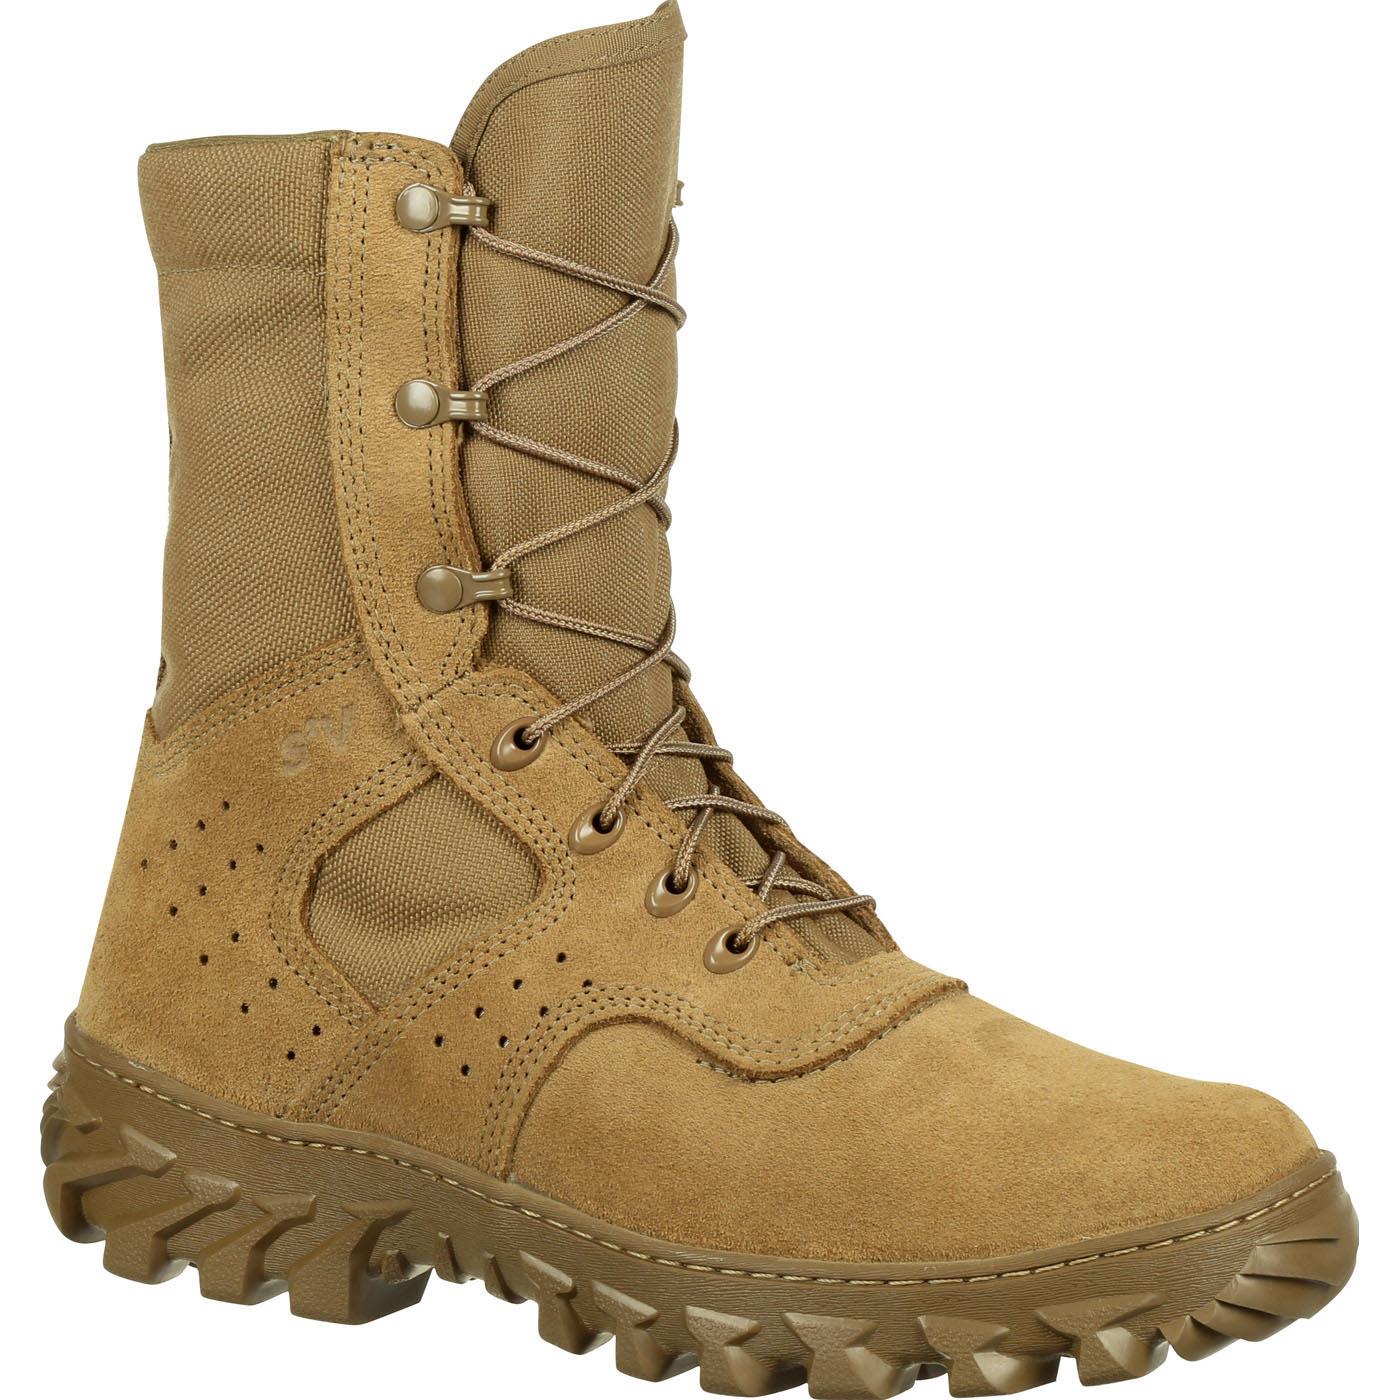 Rocky S2V Enhanced Jungle Boot with puncture-resistance